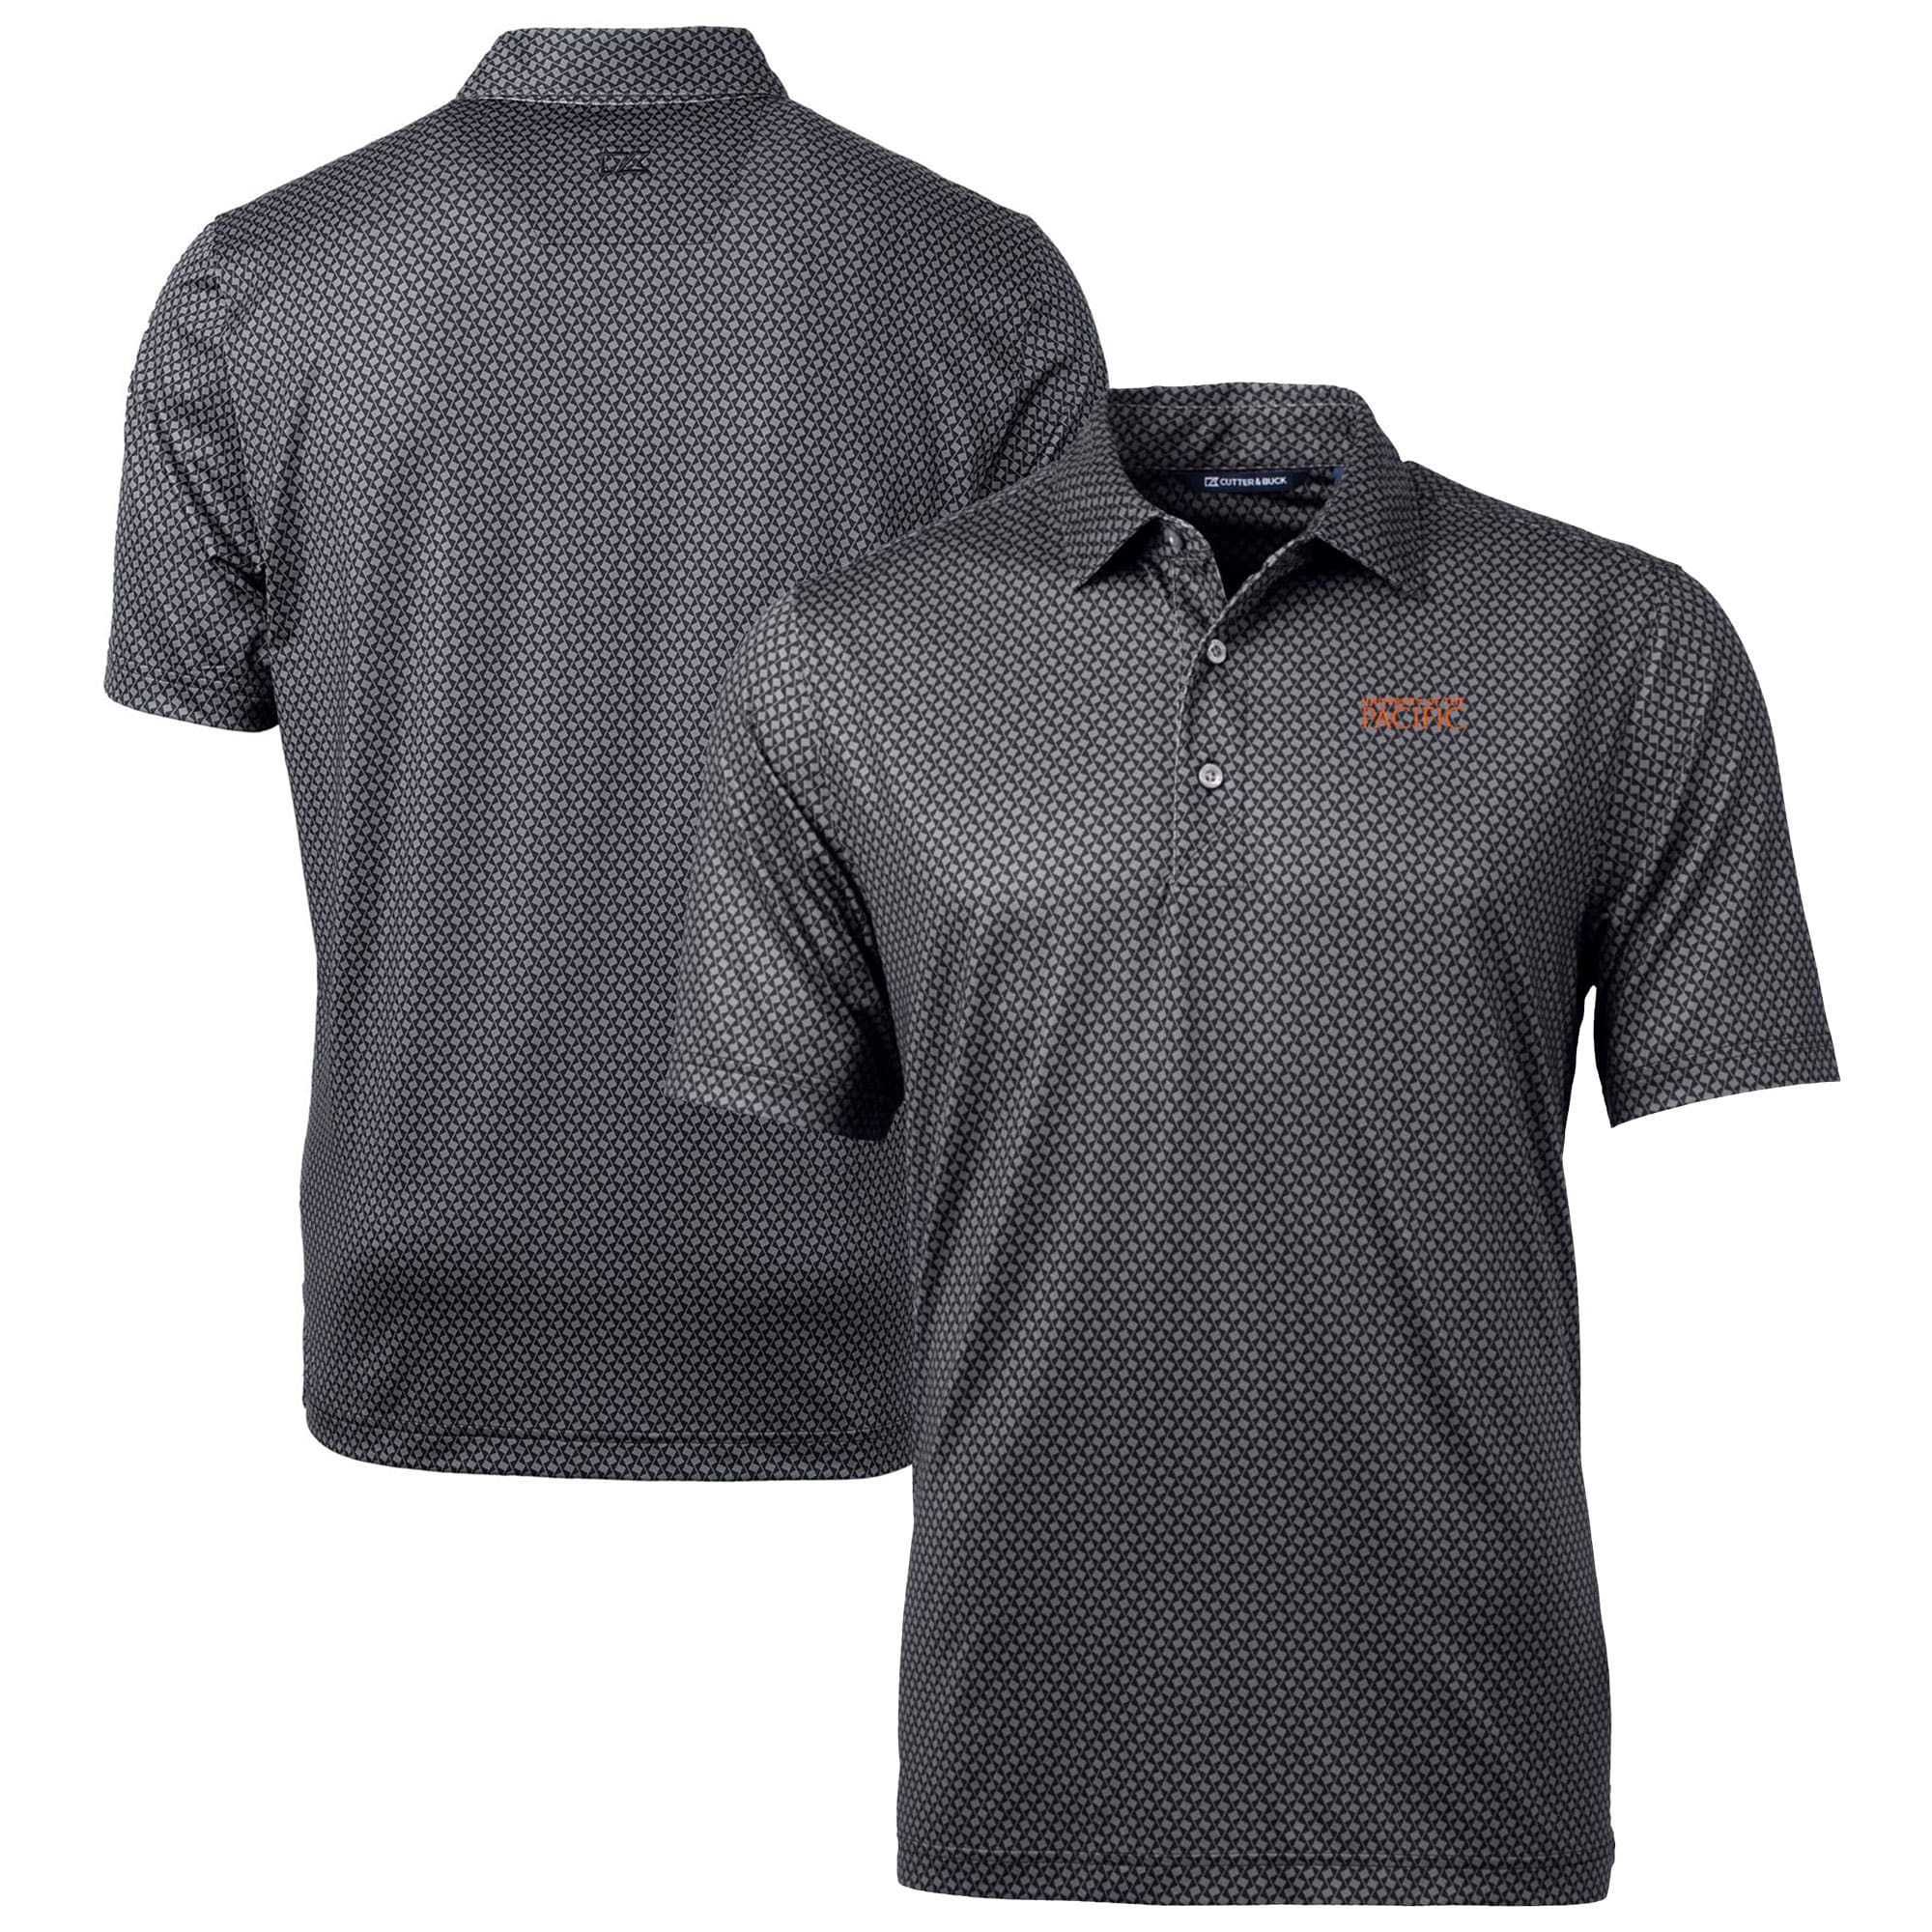 Men's Cutter & Buck Black Pacific Tigers Big & Tall Pike Banner Print Polo - image 1 of 3